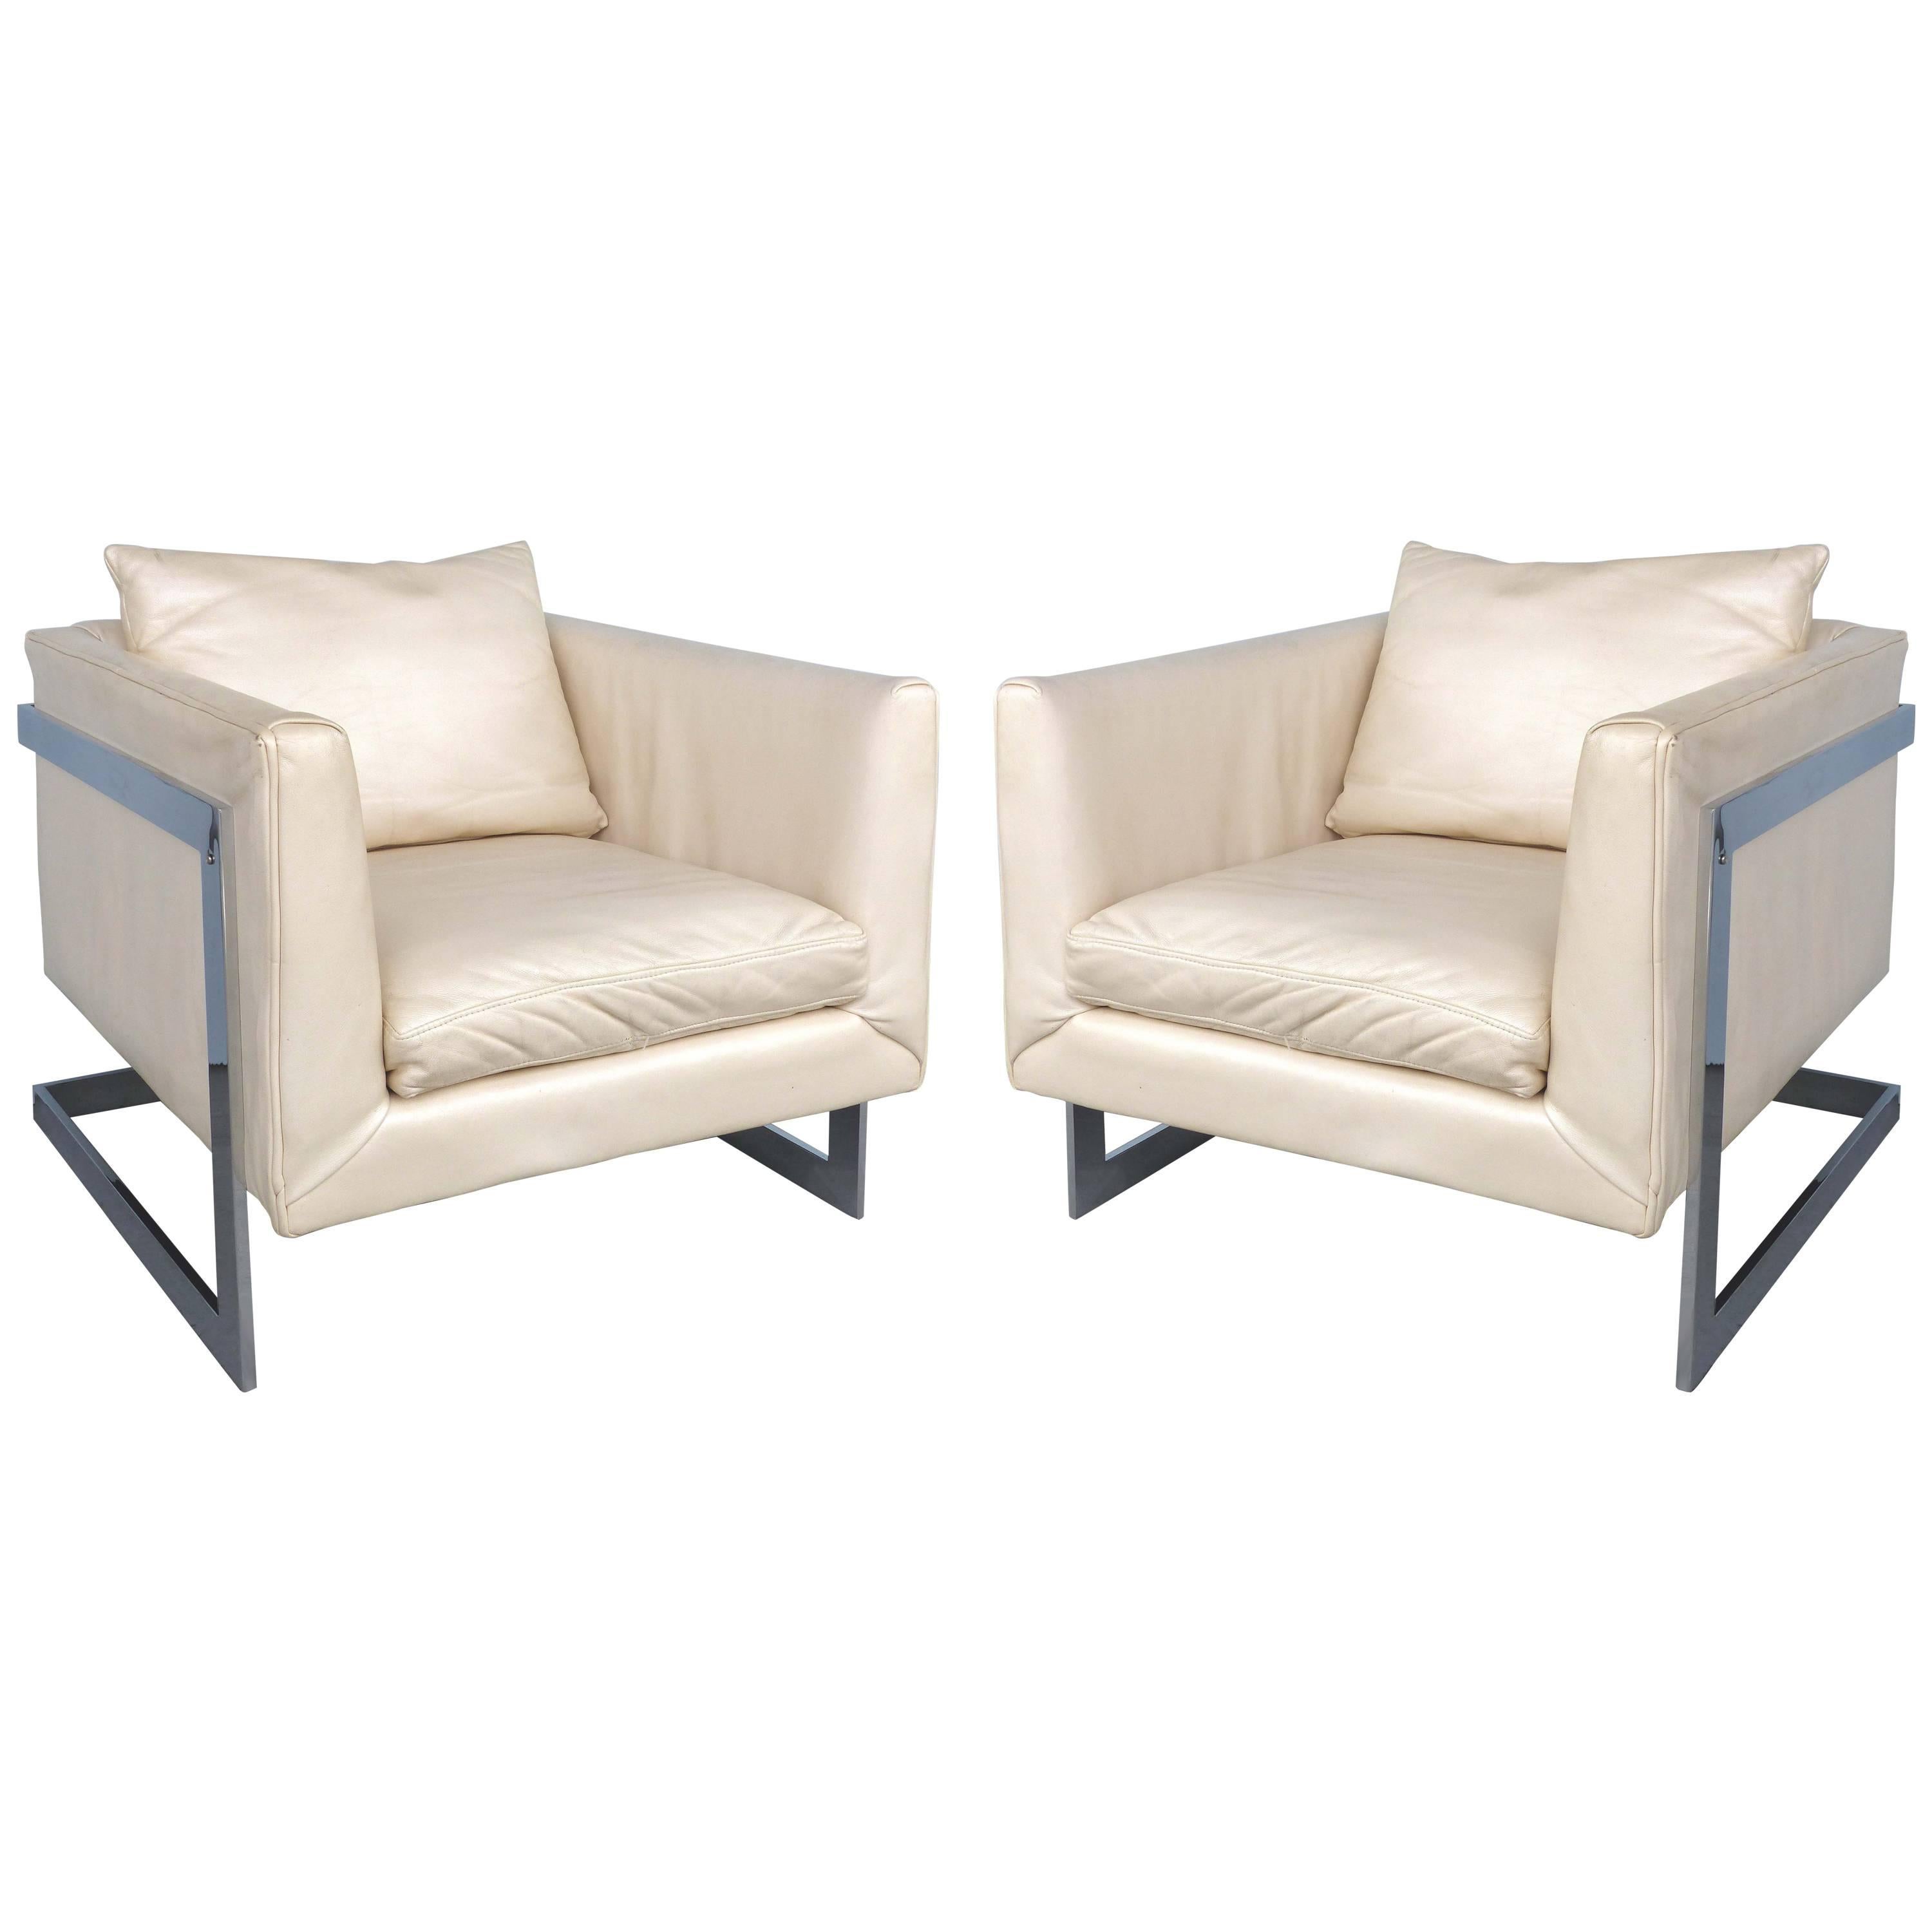 Midcentury Milo Baughman Cantilevered Chrome and Ivory Leather Club Chairs, Pair